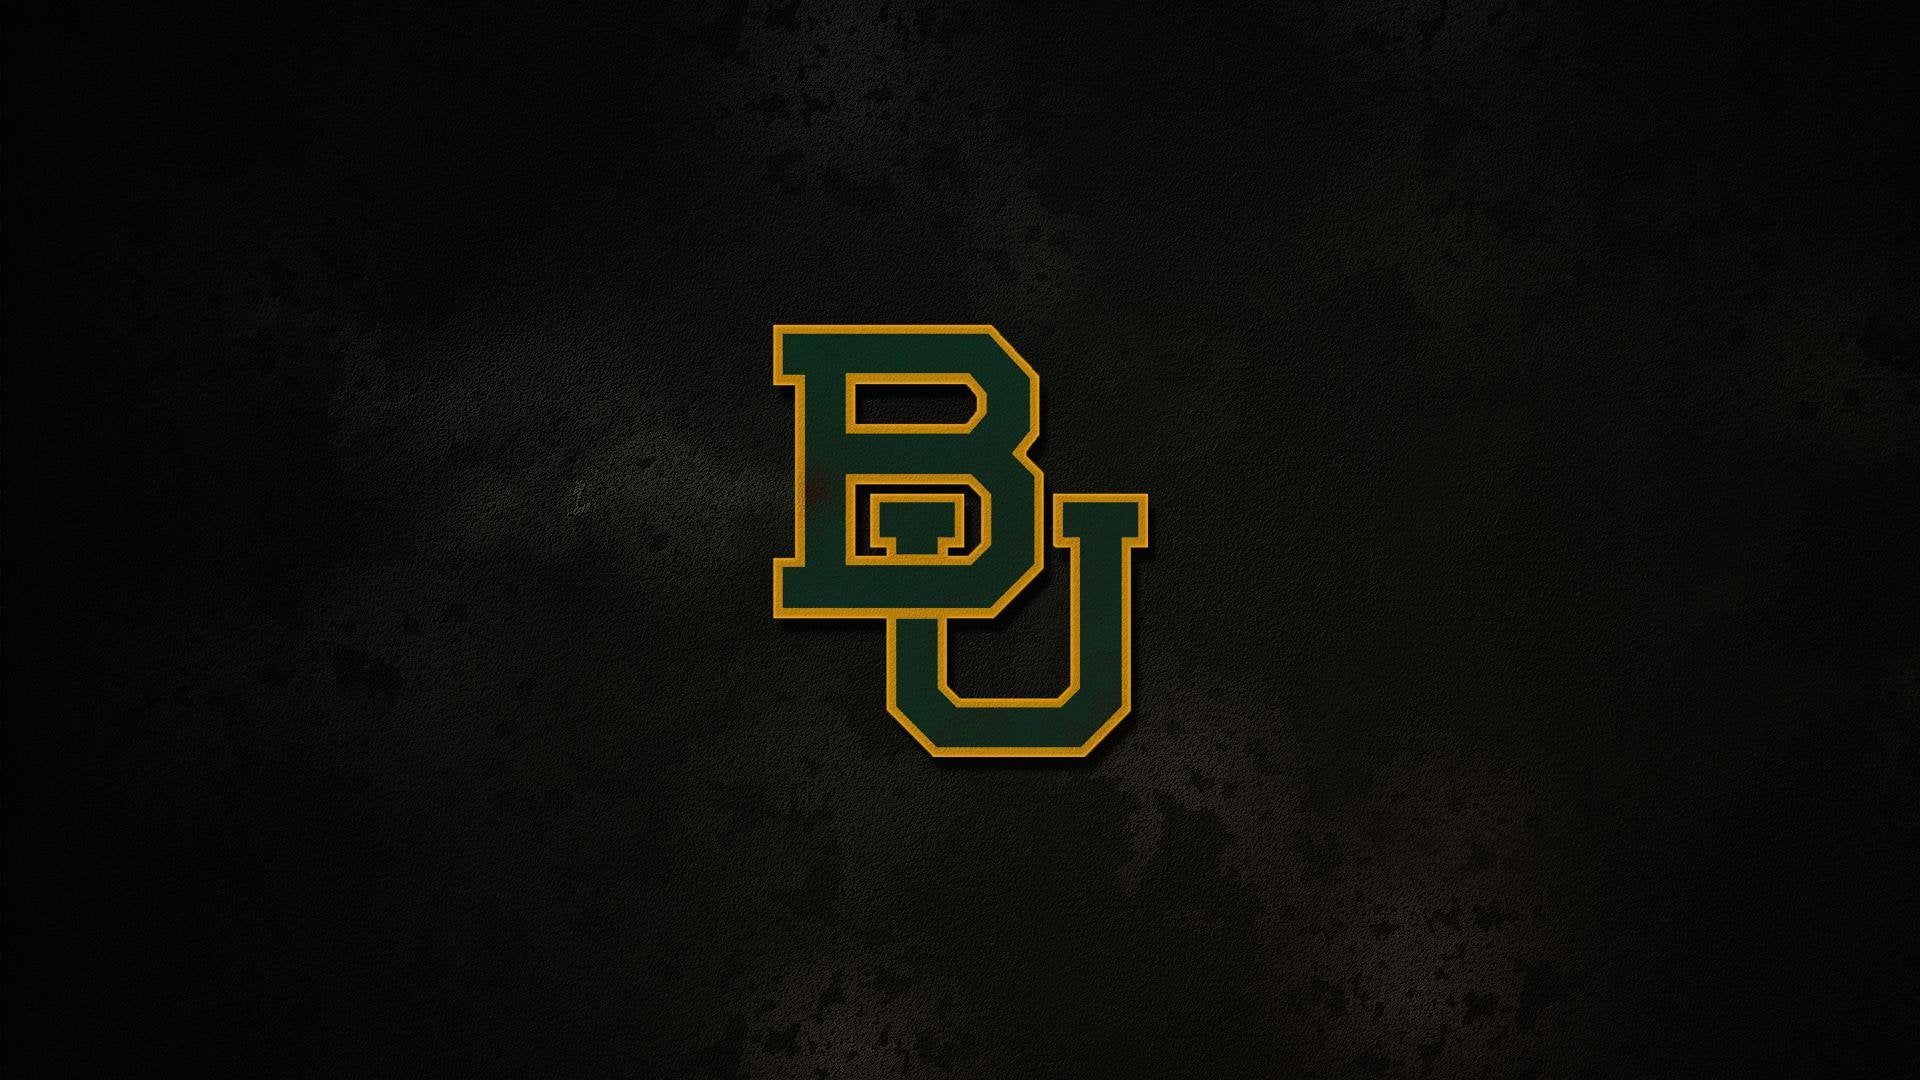 Simple But Cool Baylor Wallpaper Made By U MizzouDude And Posted In R Cfb